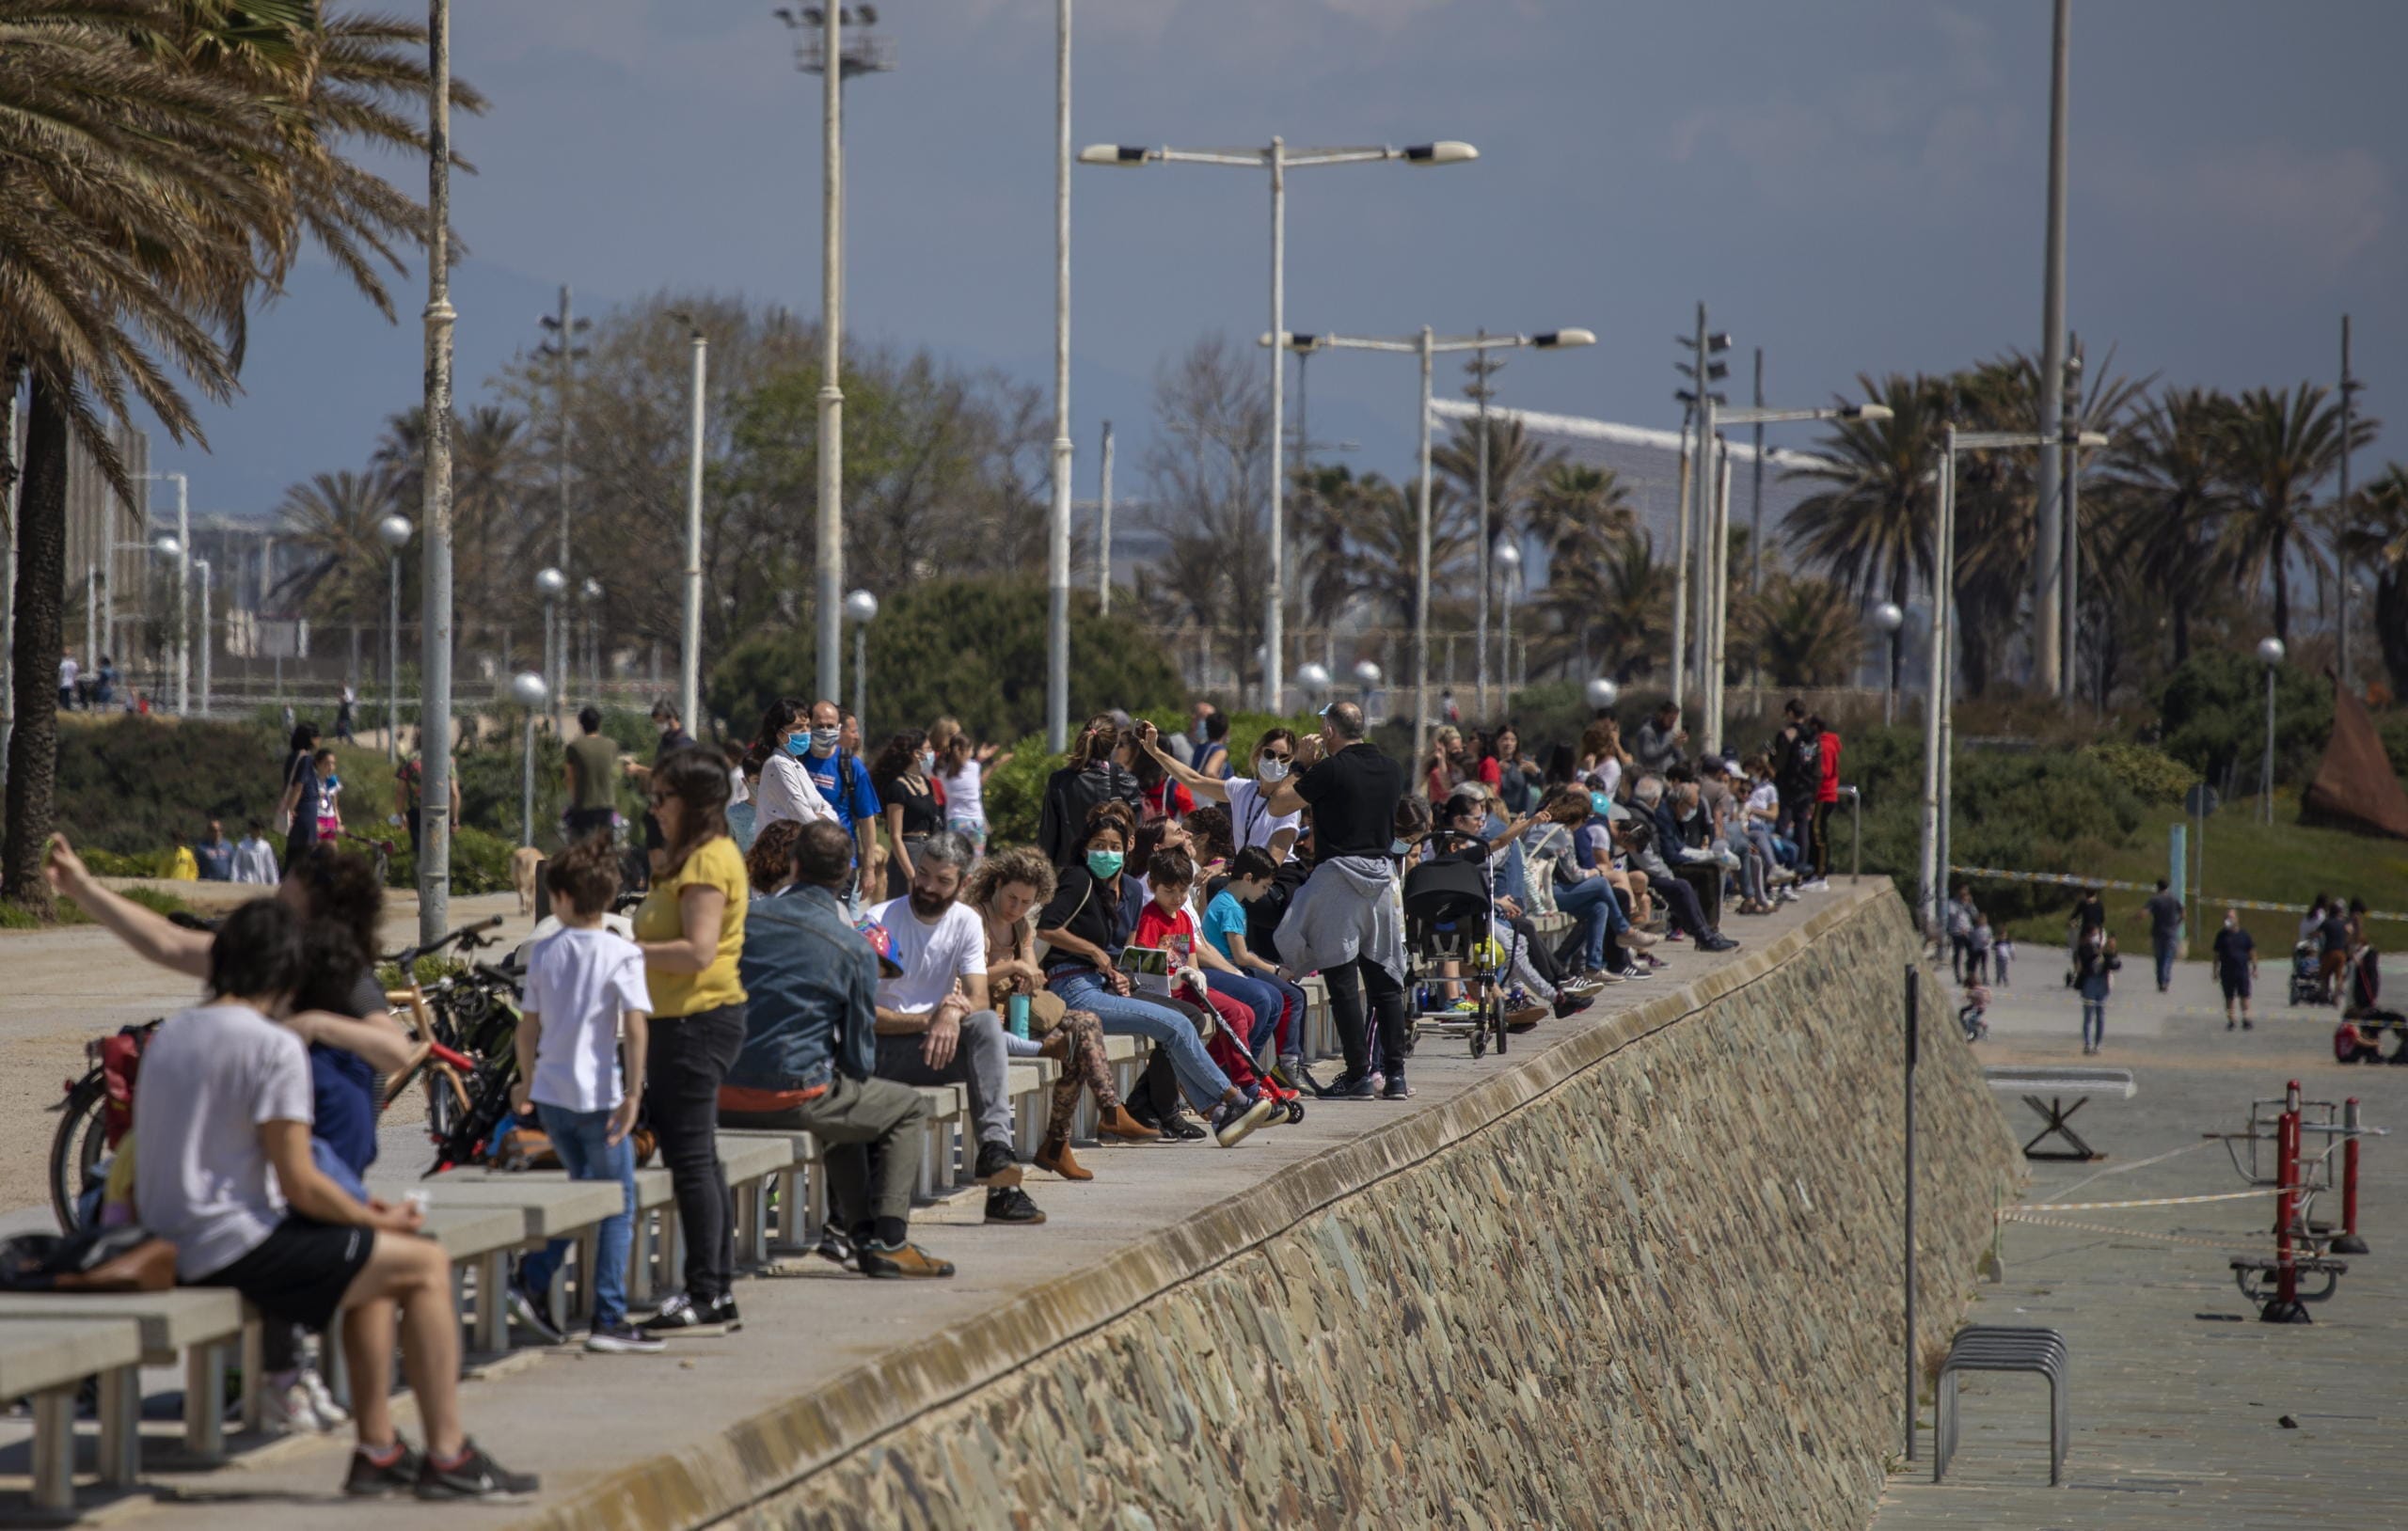 Families with their children sit in a boulevard as police patrol the beach, where access is prohibited, in Barcelona, Spain, Sunday, April 26, 2020 as the lockdown to combat the spread of coronavirus continues. On Sunday, children under 14 years old will be allowed to take walks with a parent for up to one hour and within one kilometer from home, ending six weeks of compete seclusion.